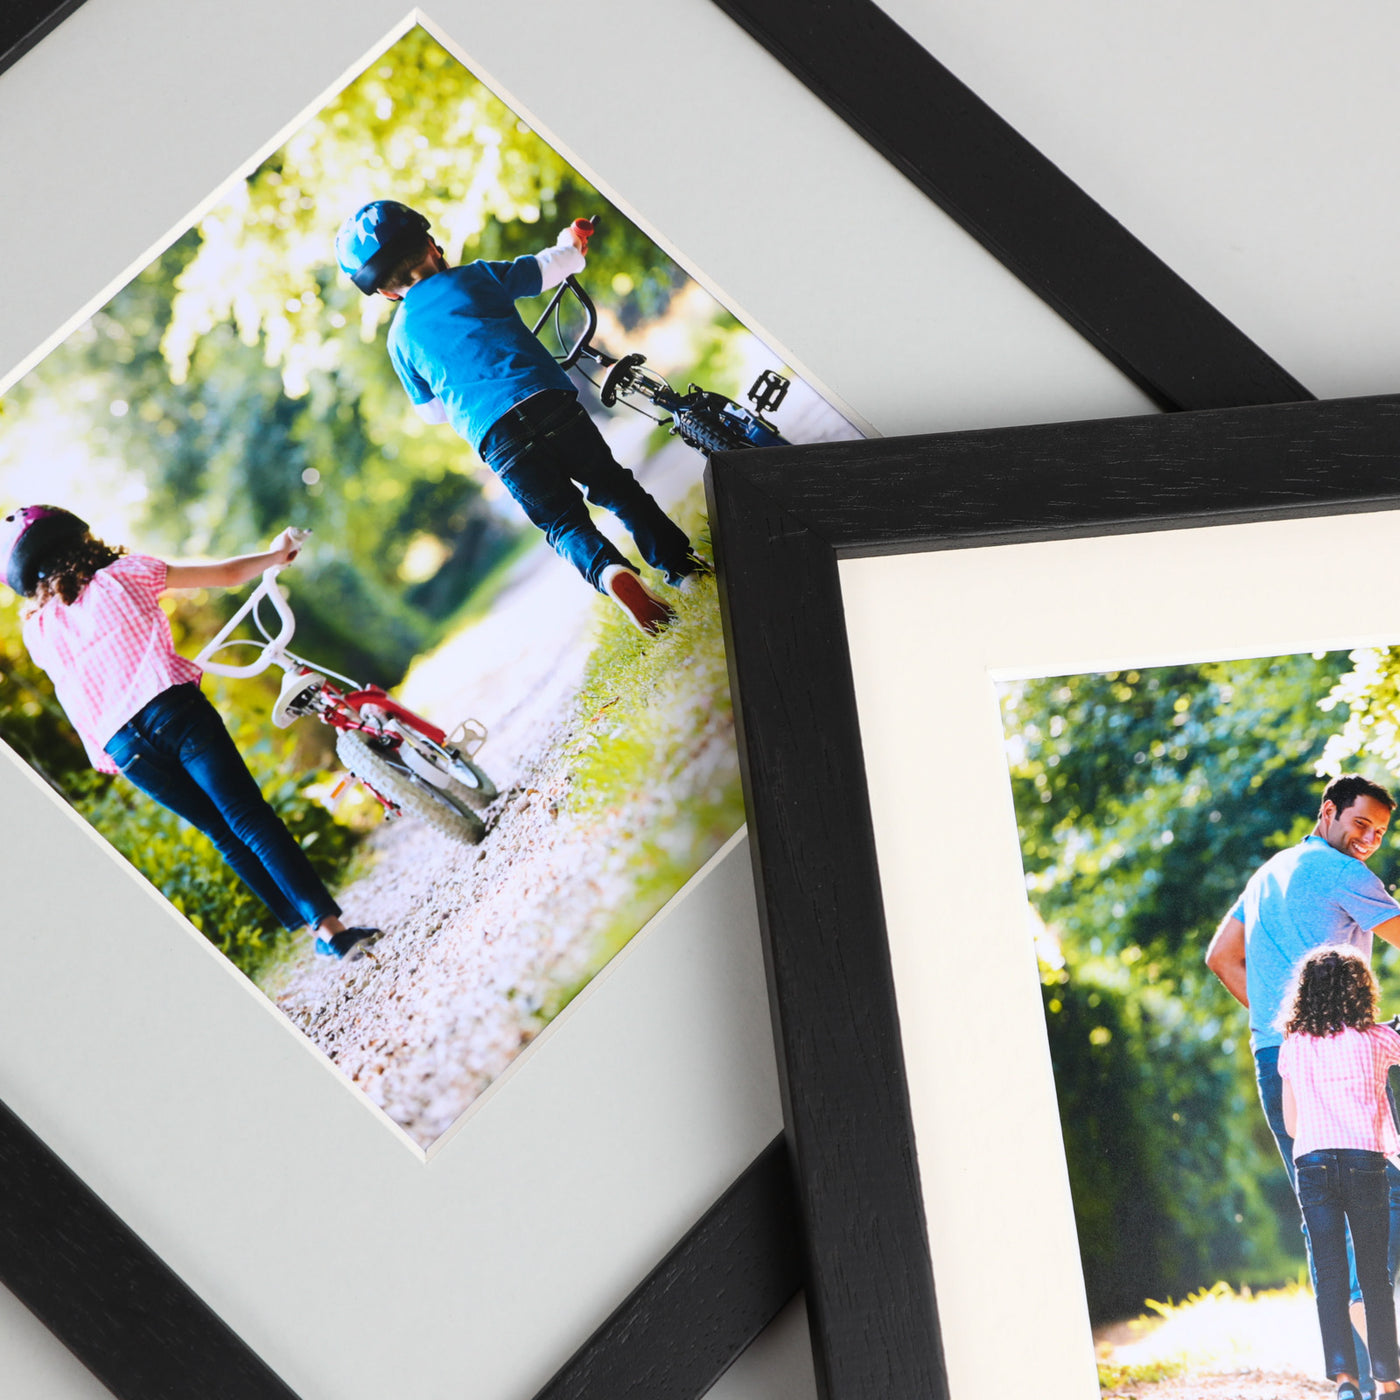 12x10 Classic Black Picture Frame with a 10x8 Mount